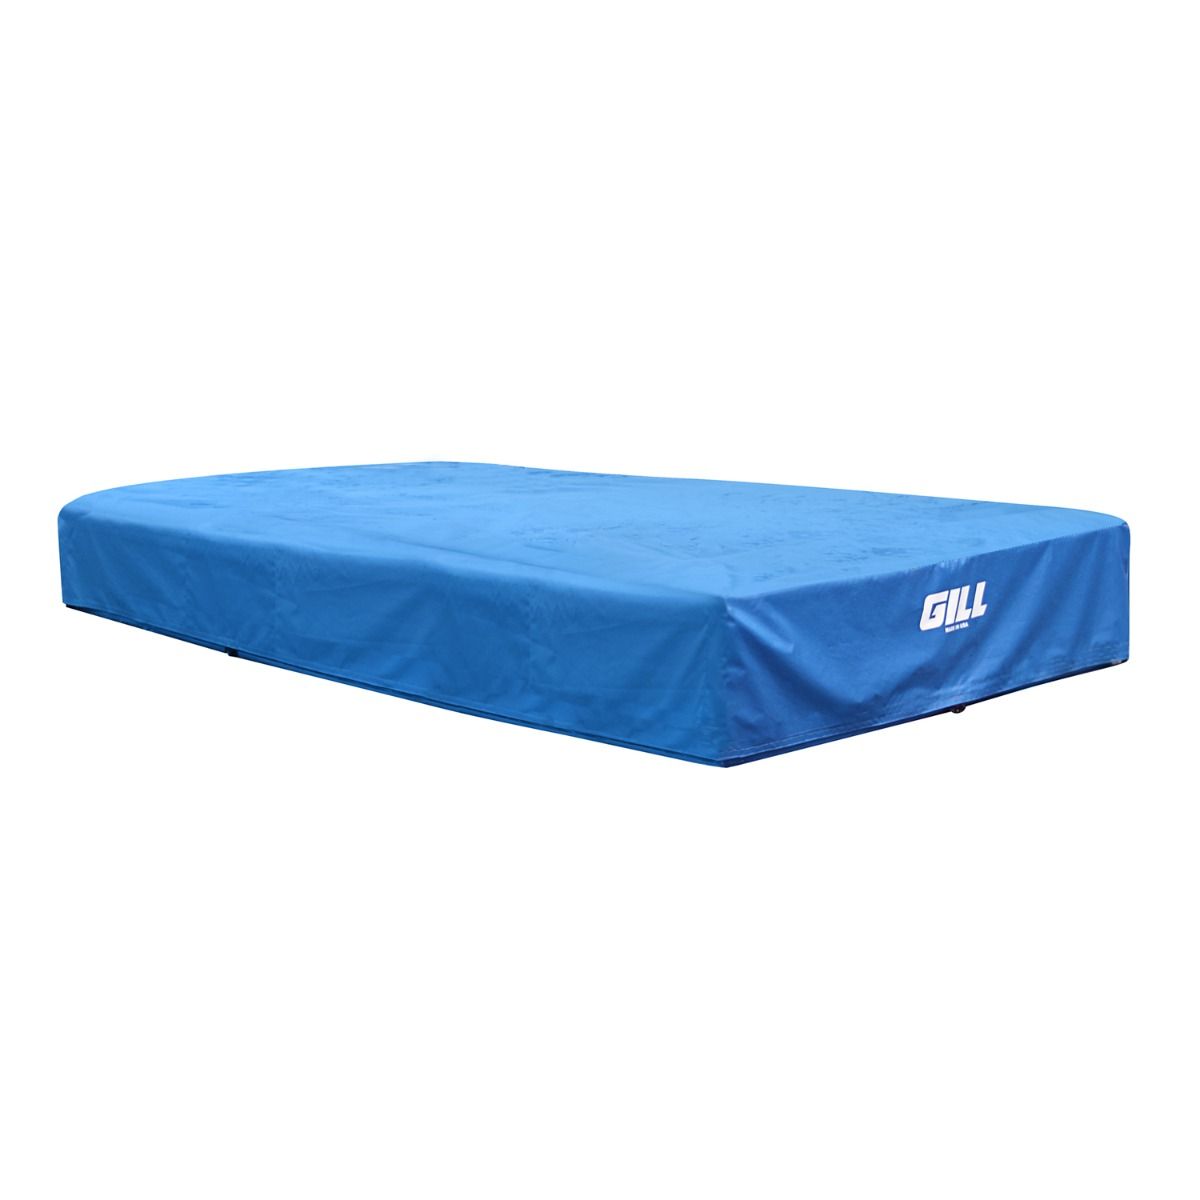 Gill Athletics Weather Cover for 640A Landing System